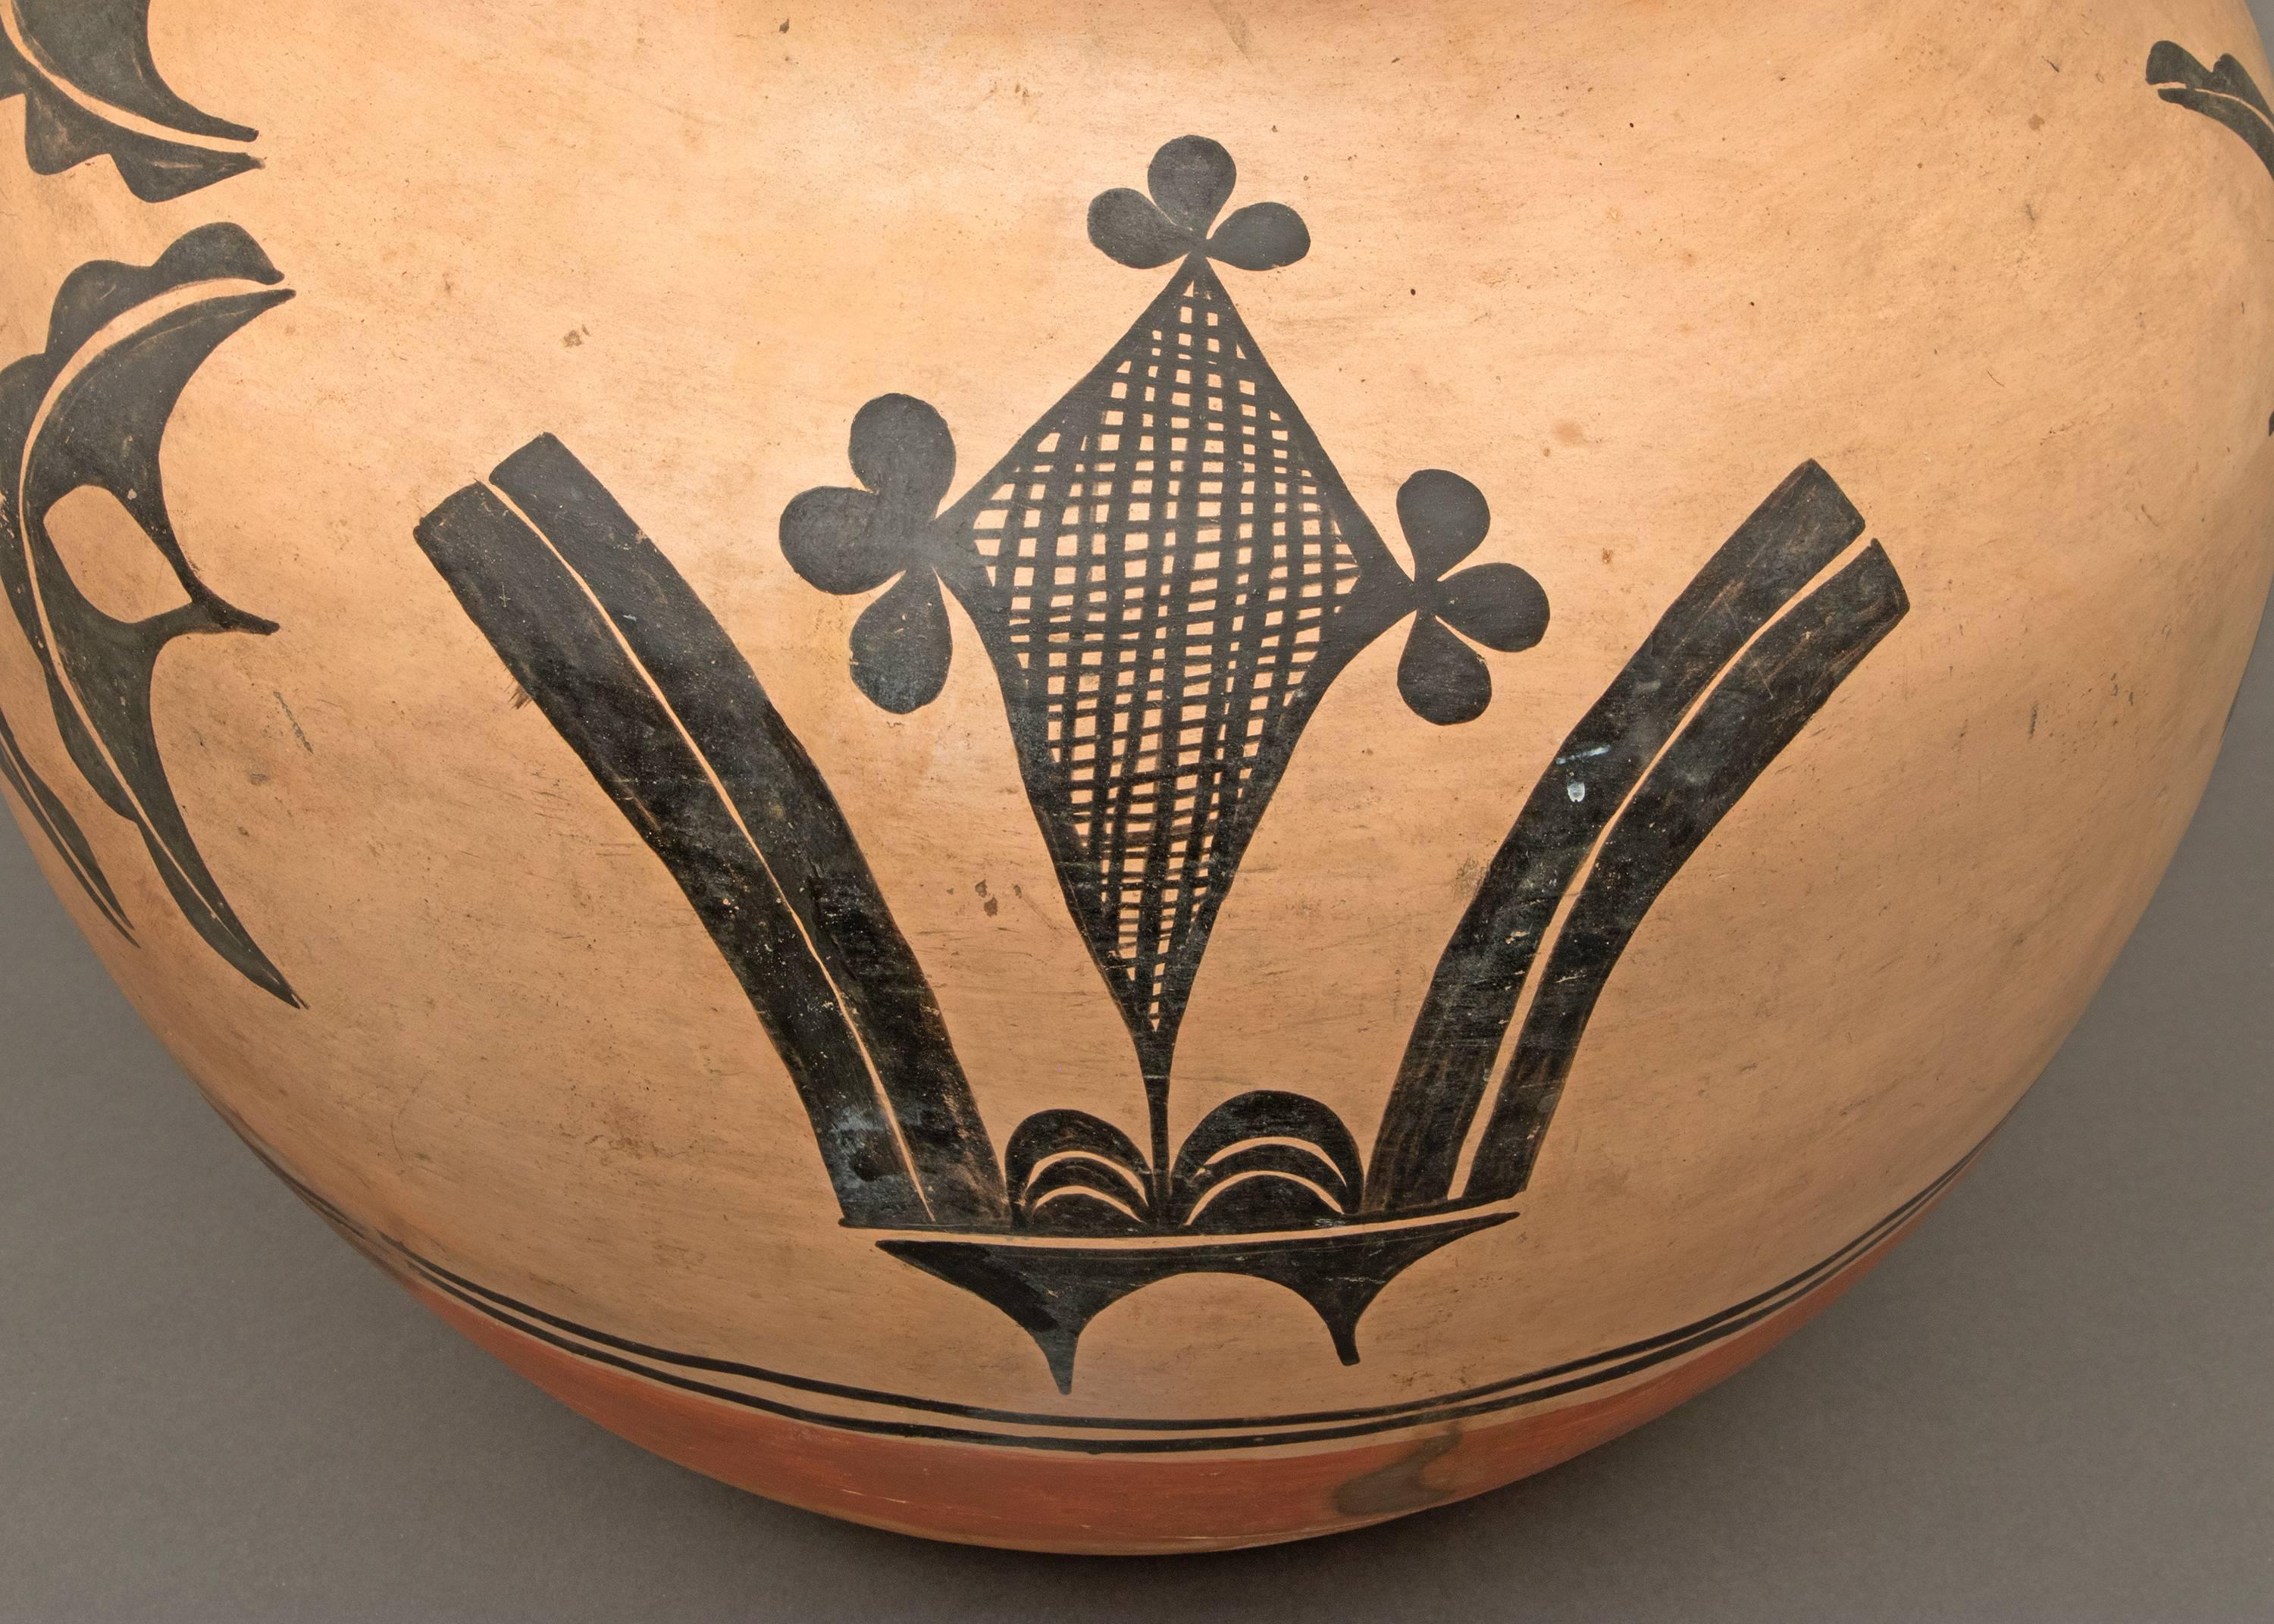 This large antique Native American Southwestern polychrome storage jar/olla has a graceful form and is painted in slip glazes in geometric and foliate designs. Created by a potter at Santa Domingo Pueblo during the late 19th or early 20th